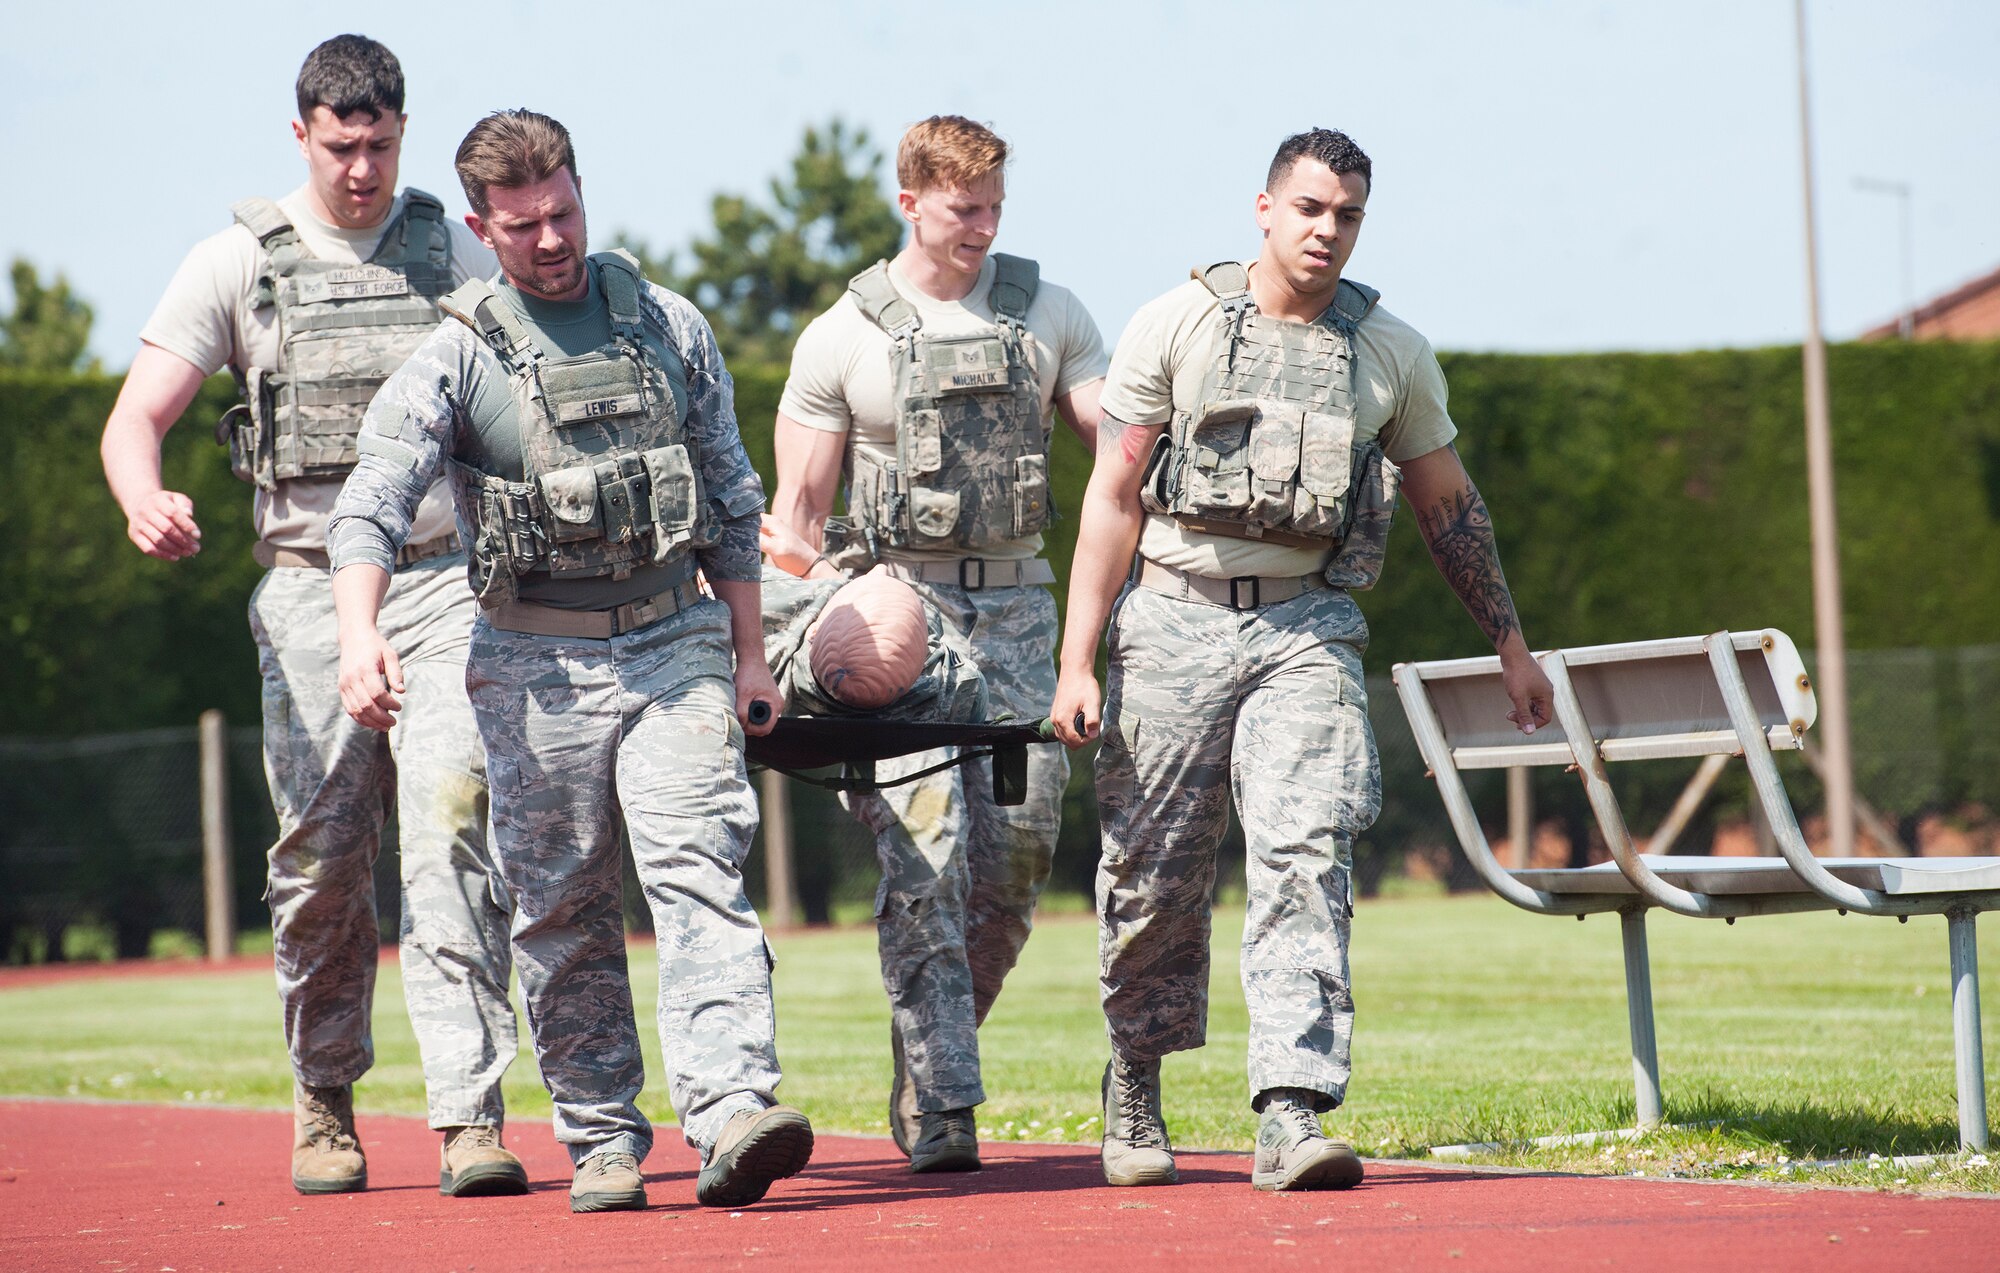 U.S. Air Force Defenders with the 423rd Security Forces Squadron, carry a medical litter during a Police Week Defenders Challenge at RAF Alconbury, England on May 15, 2019. Police Week occurs each year across the peace officer community as a way of remembrance of those that have served in law enforcement and those that paid have the ultimate sacrifice. (U.S. Air Force photo by MSgt. Brian Kimball)